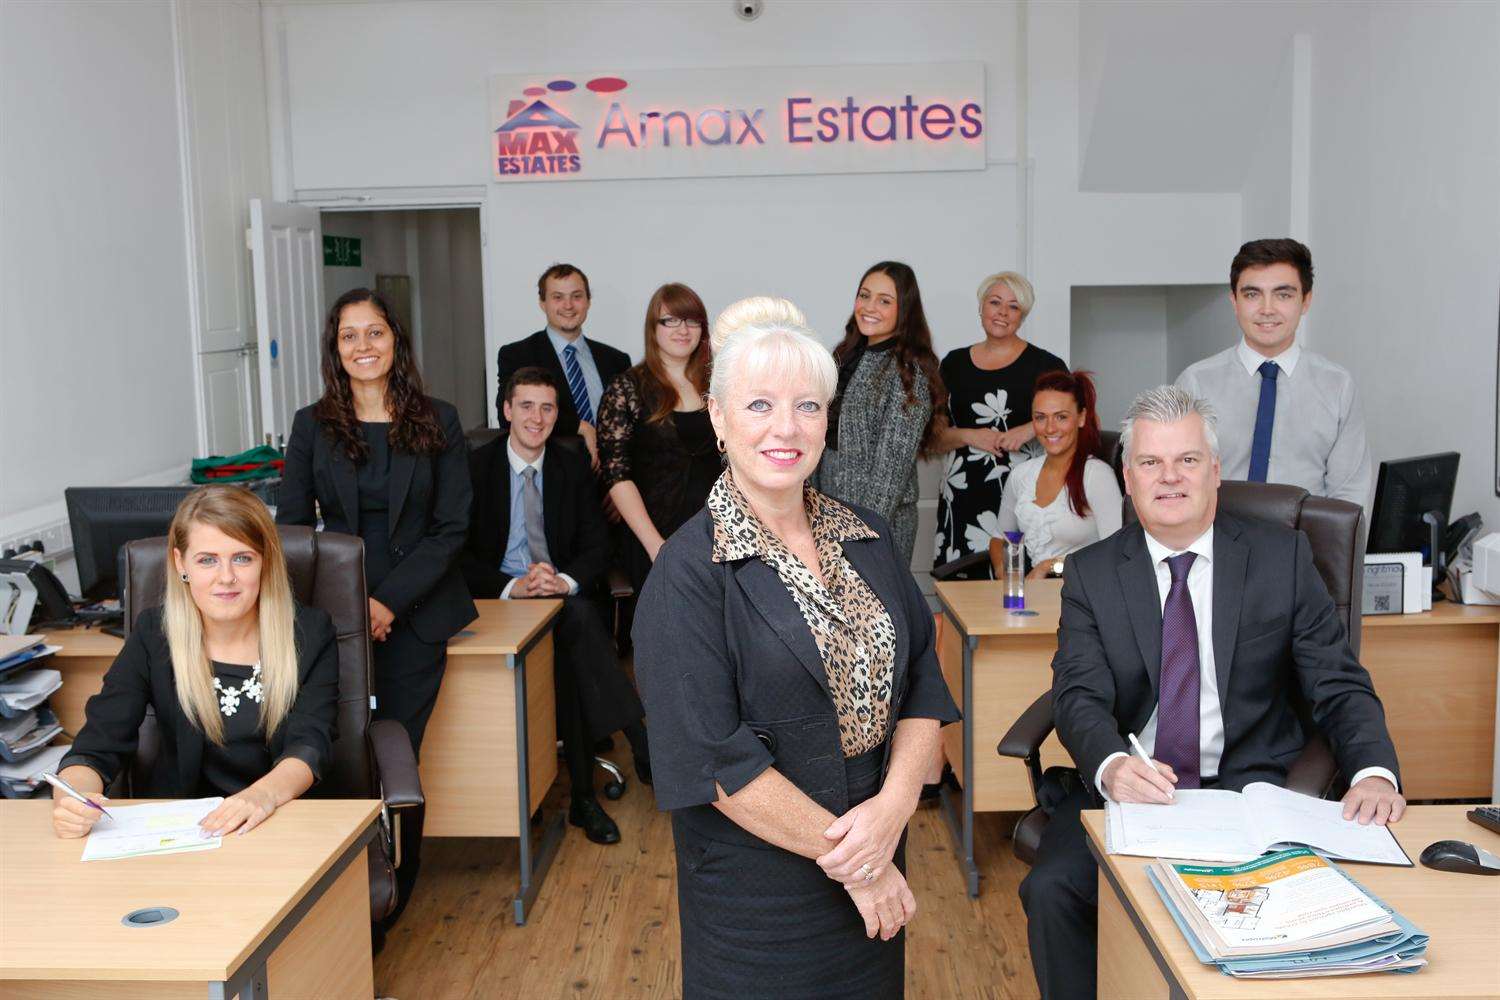 Maxine Fothergill with the Amax team